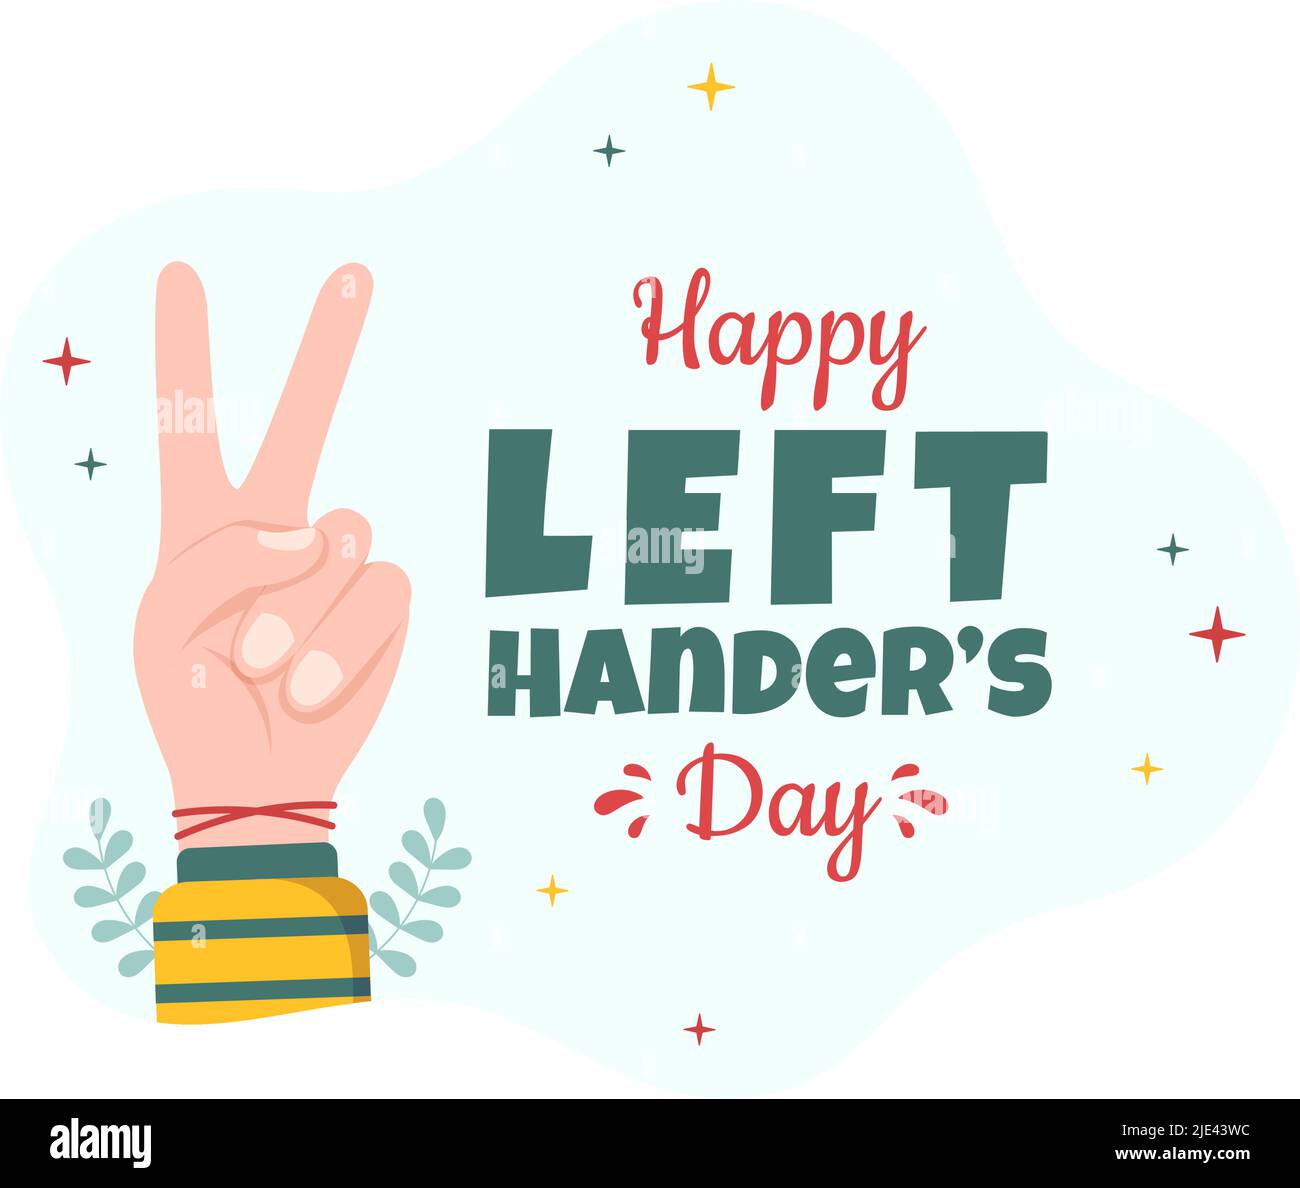 International Left Handers Day Celebration with her Left Hand Raised on the August in Cartoon Style Background Illustration Stock Vector